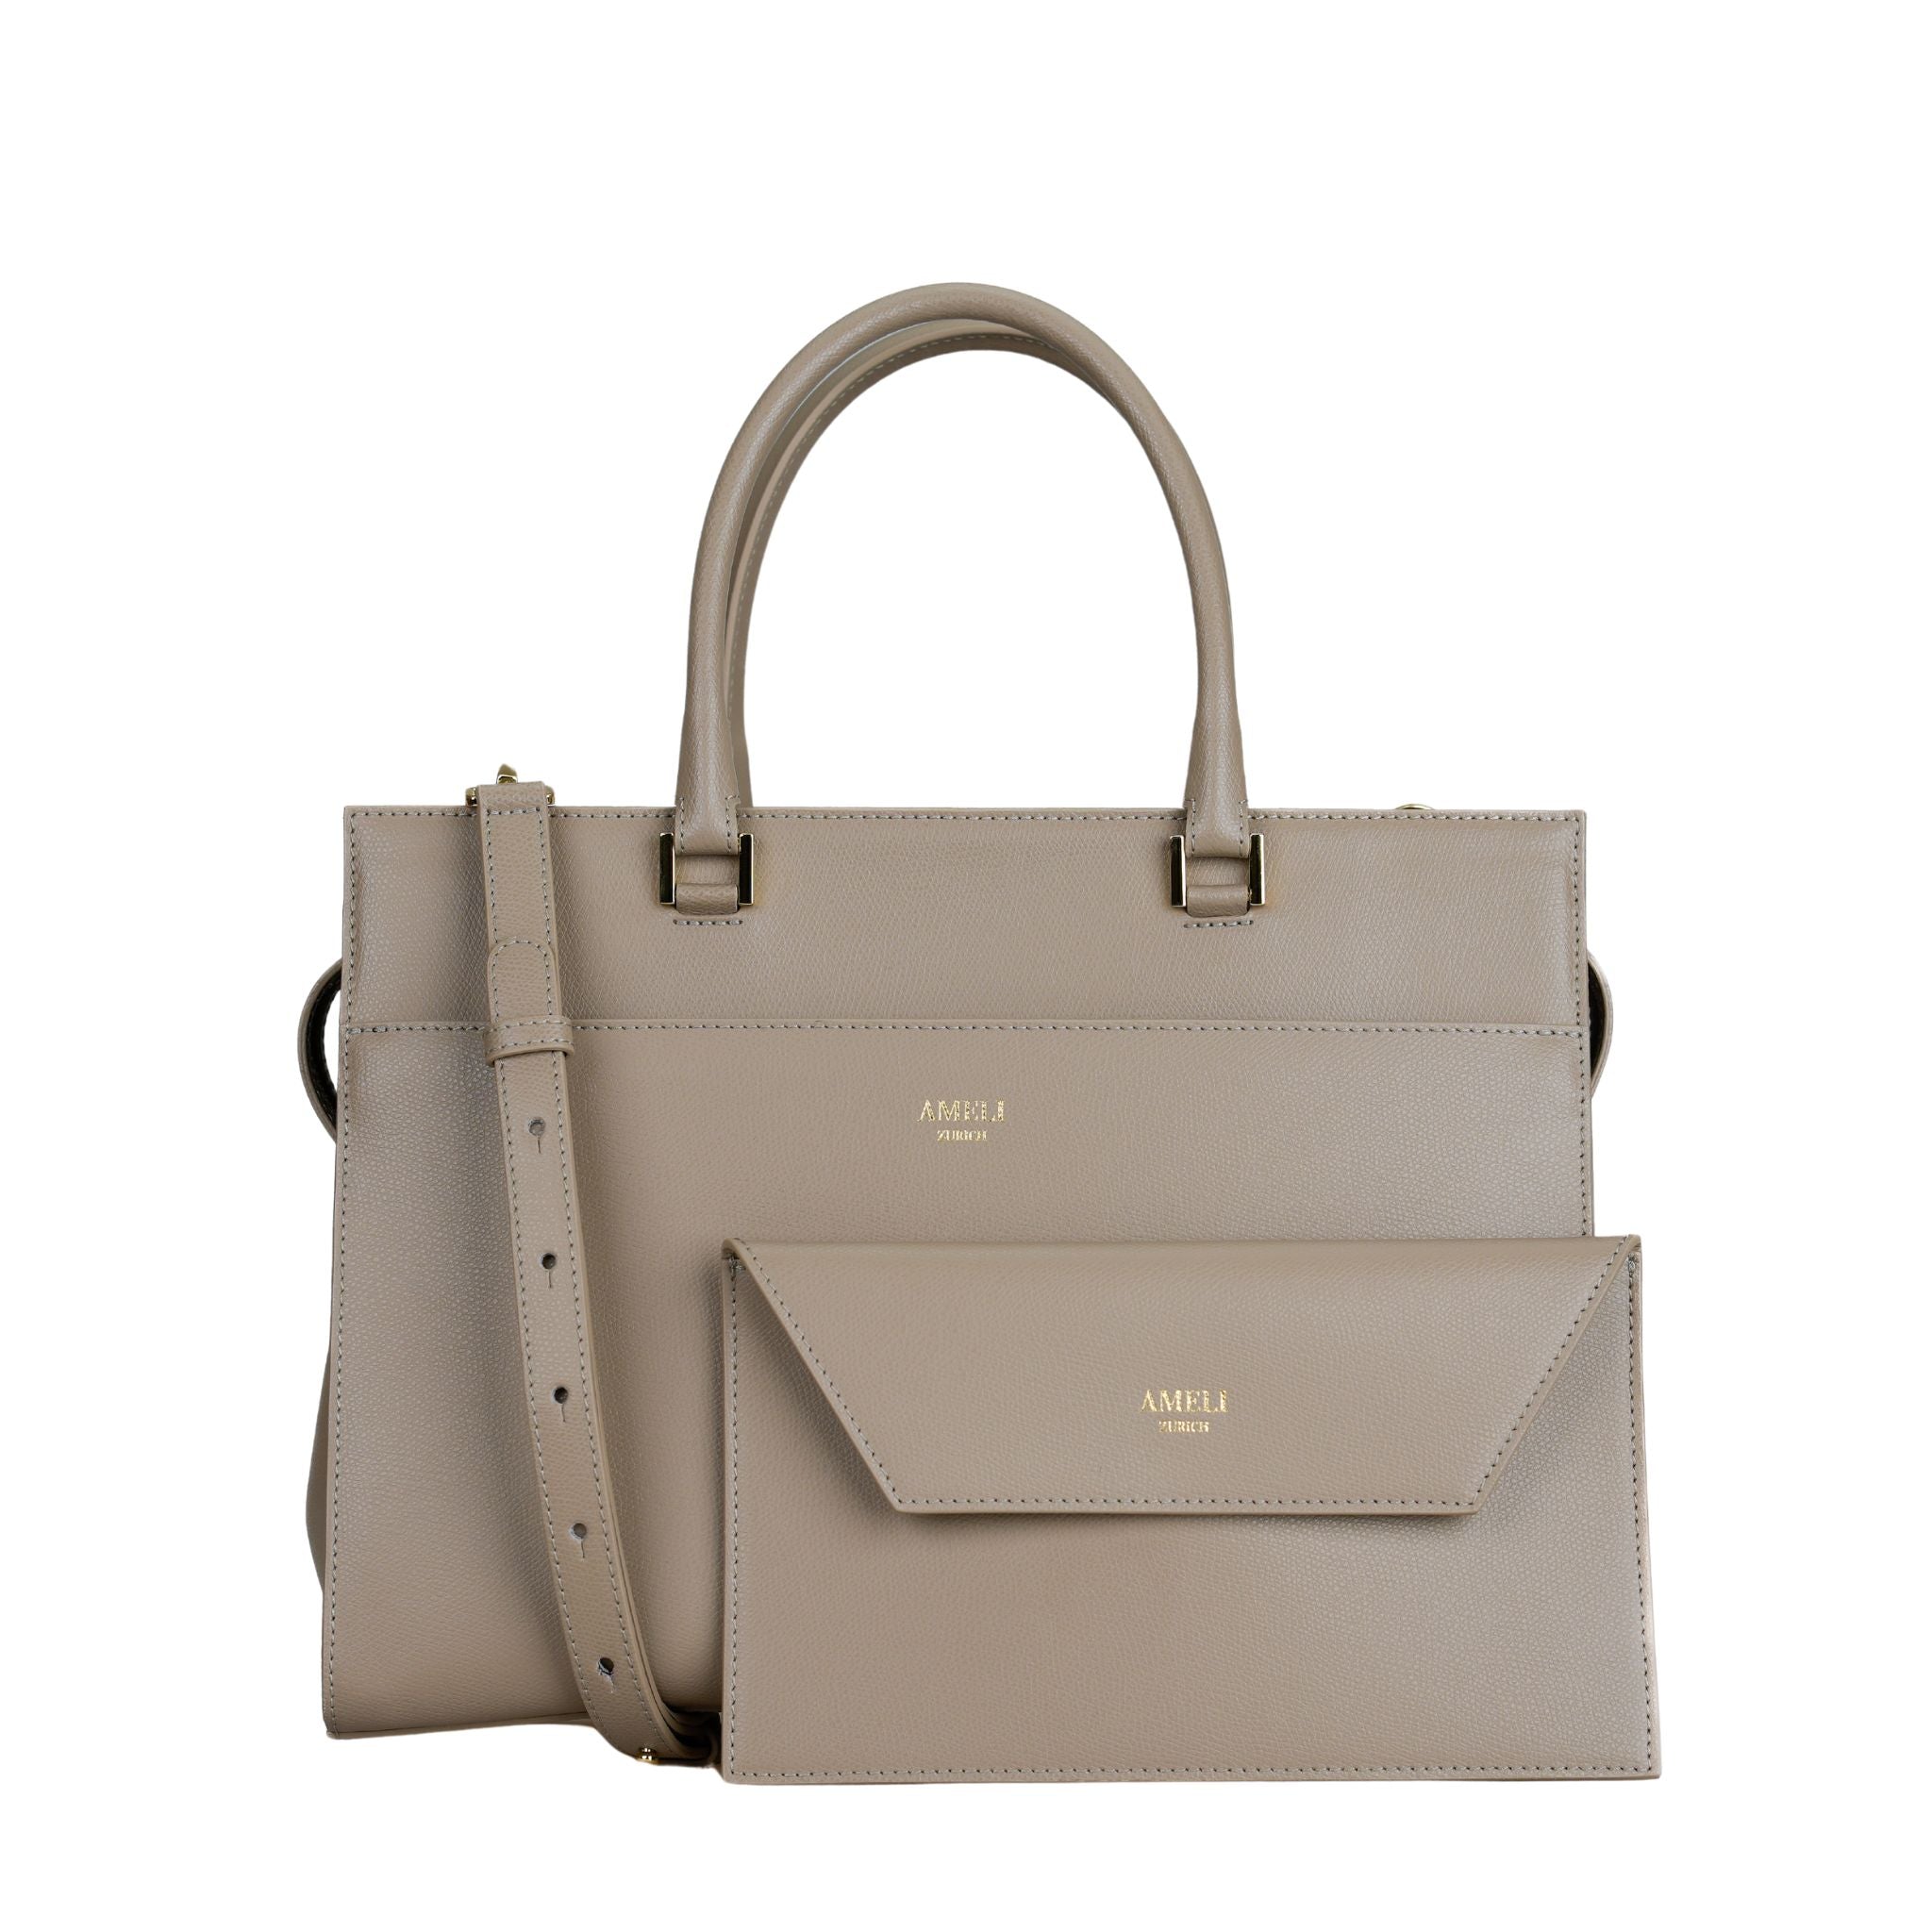 AMELI Zurich | CENTRAL | Cappuccino | Pebbled Leather | With clutch